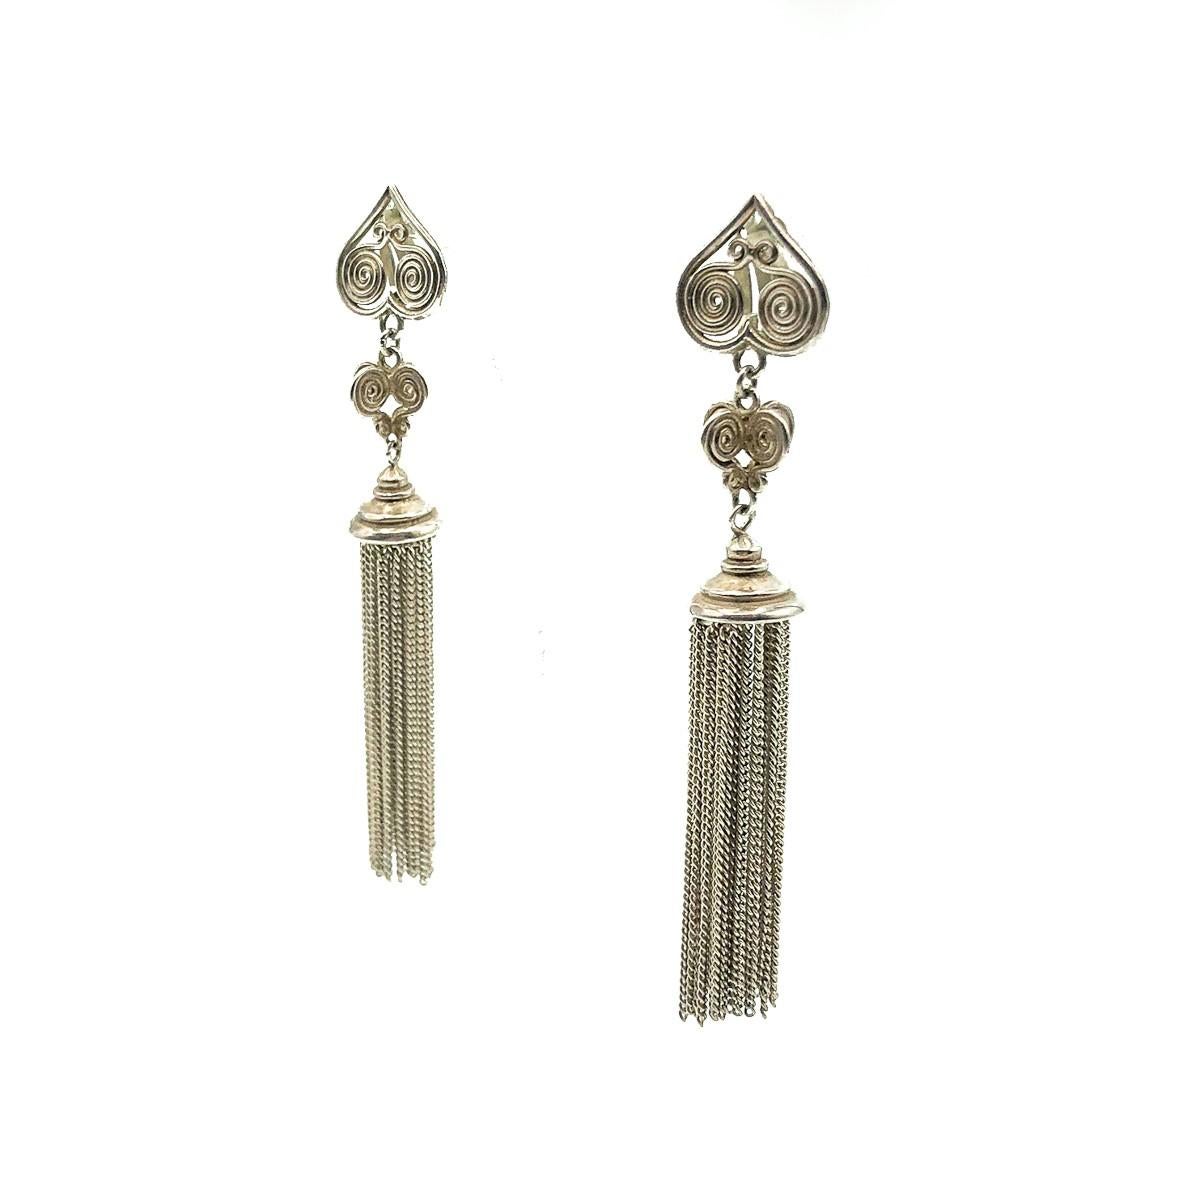 A divine pair of Vintage Silver Tassel Earrings. Crafted in solid sterling silver. A weighty fine chain tassel drops from a heart inspired design top. In very good vintage condition without damage or repair, stamped 'sterling', approx. 9cms.